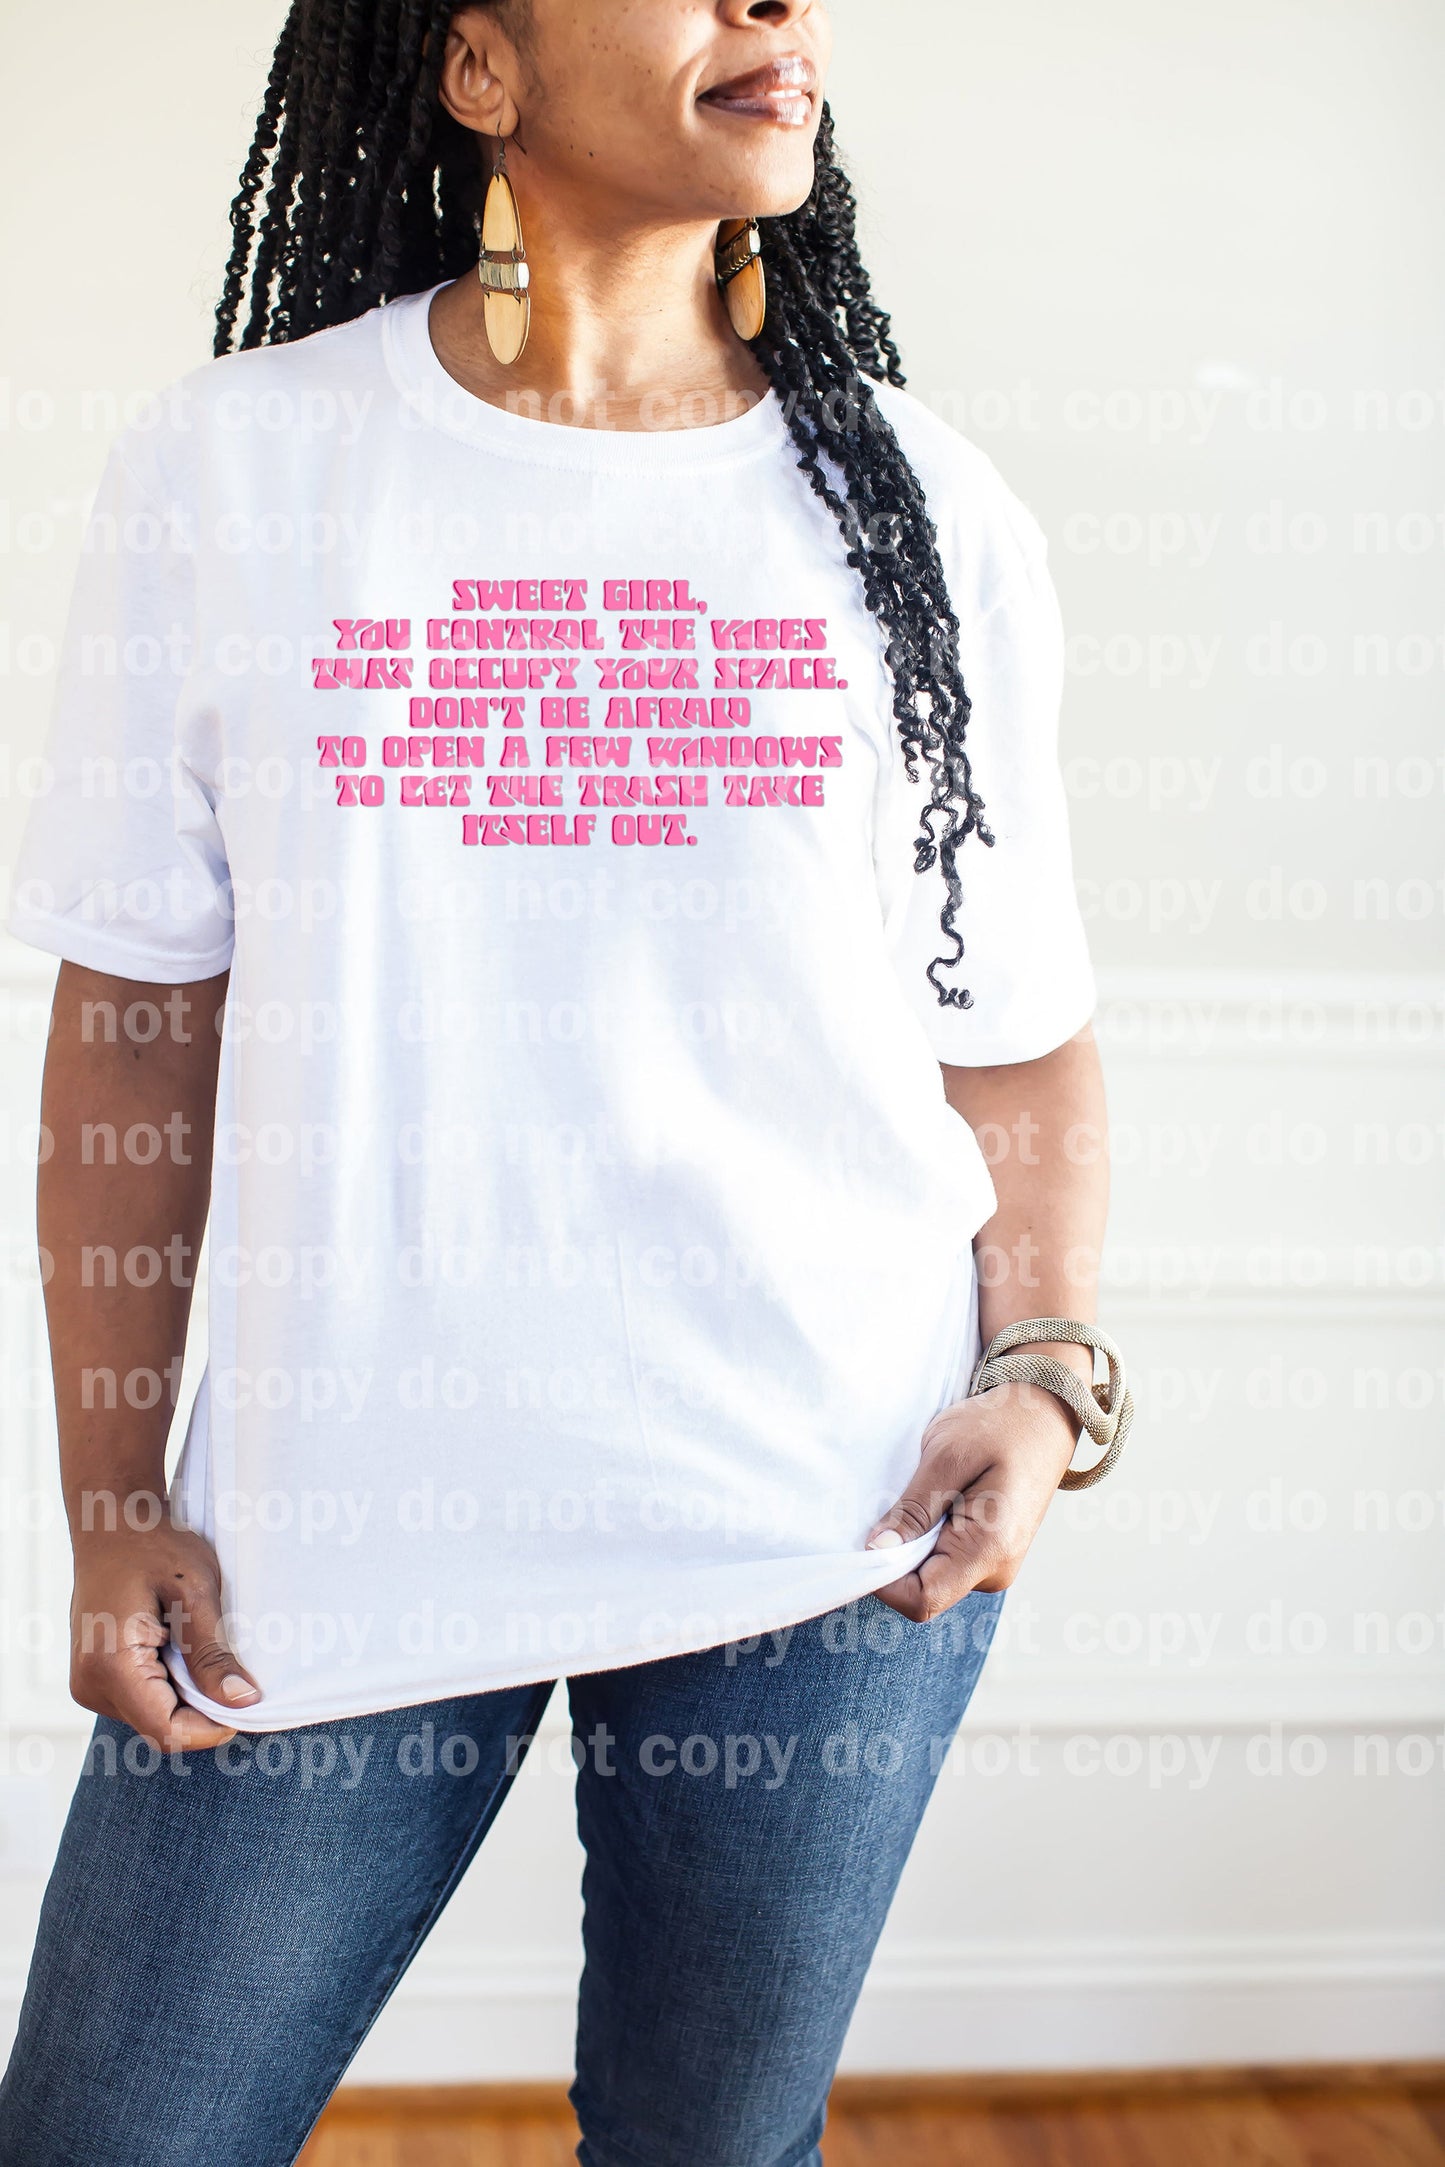 Sweet Girl You Control The Vibes That Occupy Your Space Dream Print or Sublimation Print